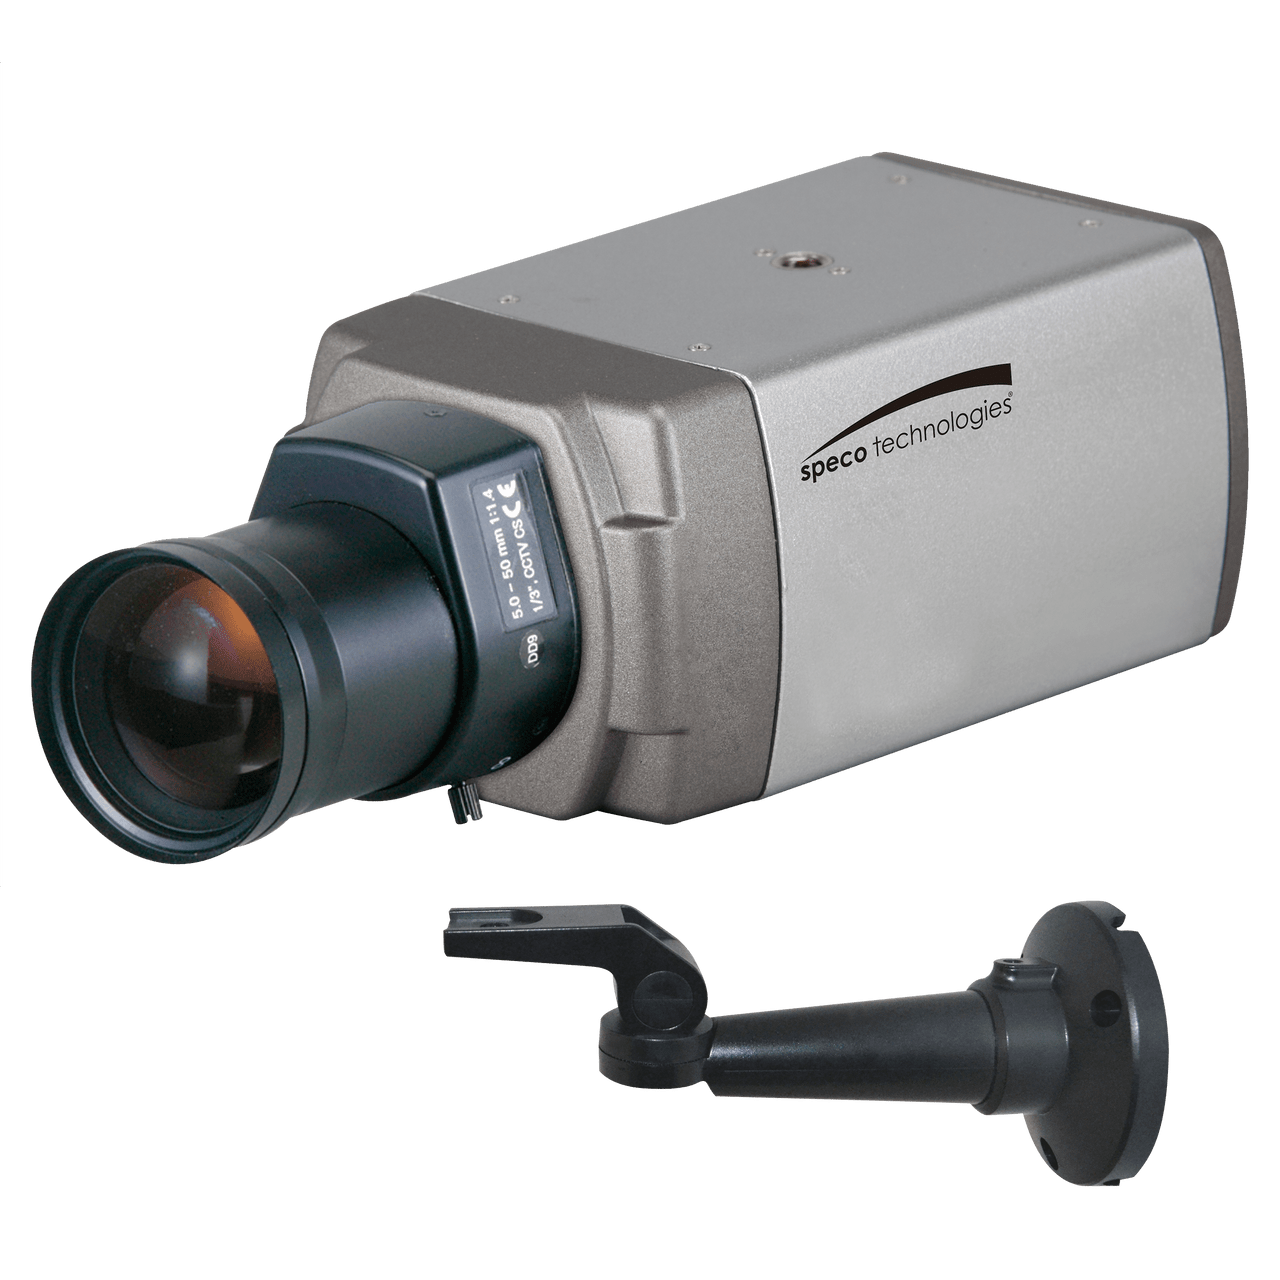 Speco Technologies SPE-O2T7 2MP Intensifier IP Traditional Camera, Uses CS Type Lenses, Gray Housing (SPE-O2T7)